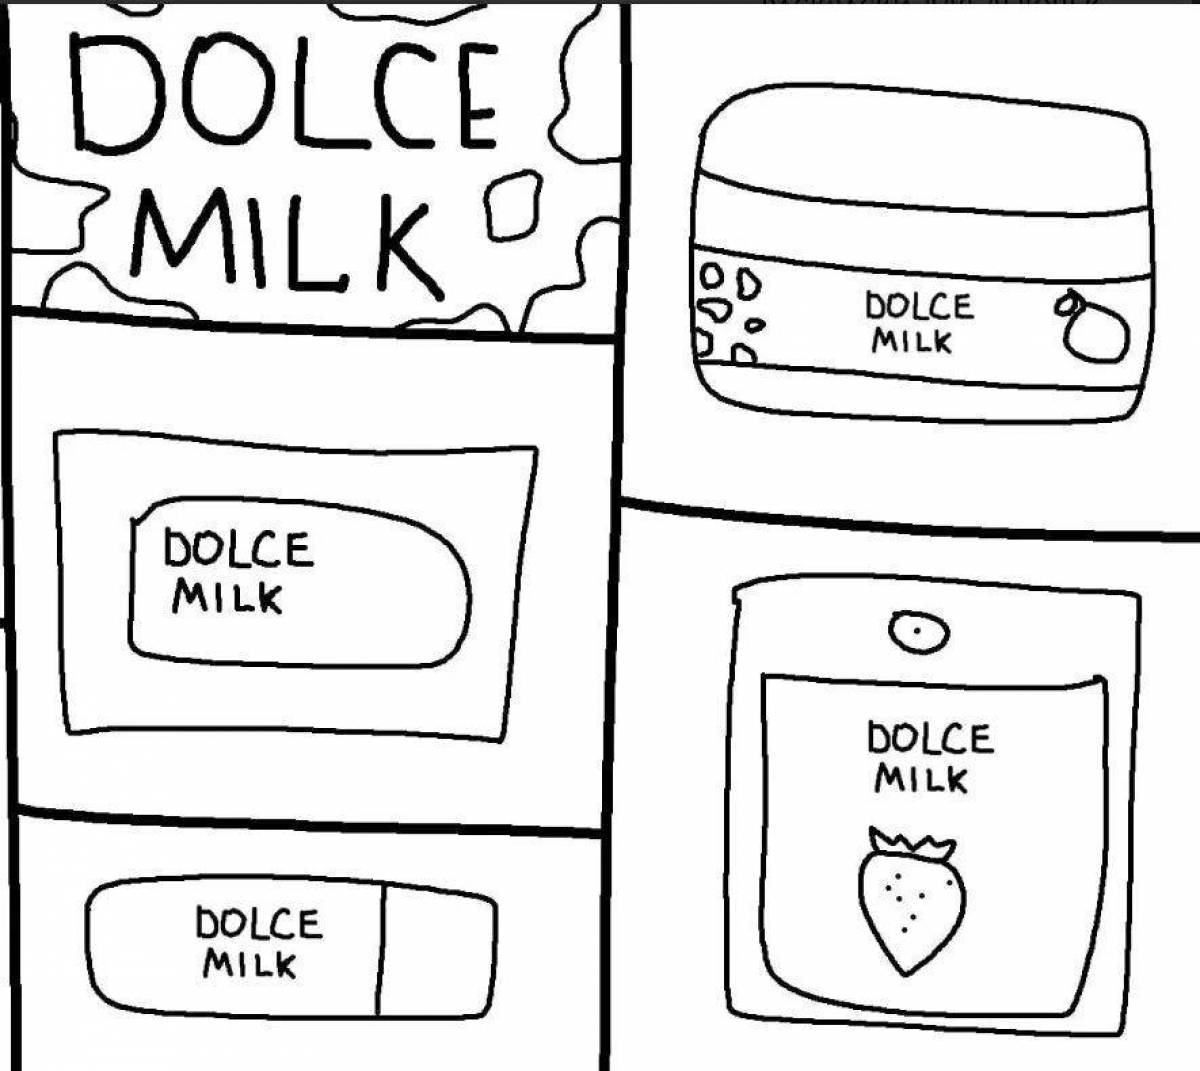 Charming milk cosmetics dolce coloring page